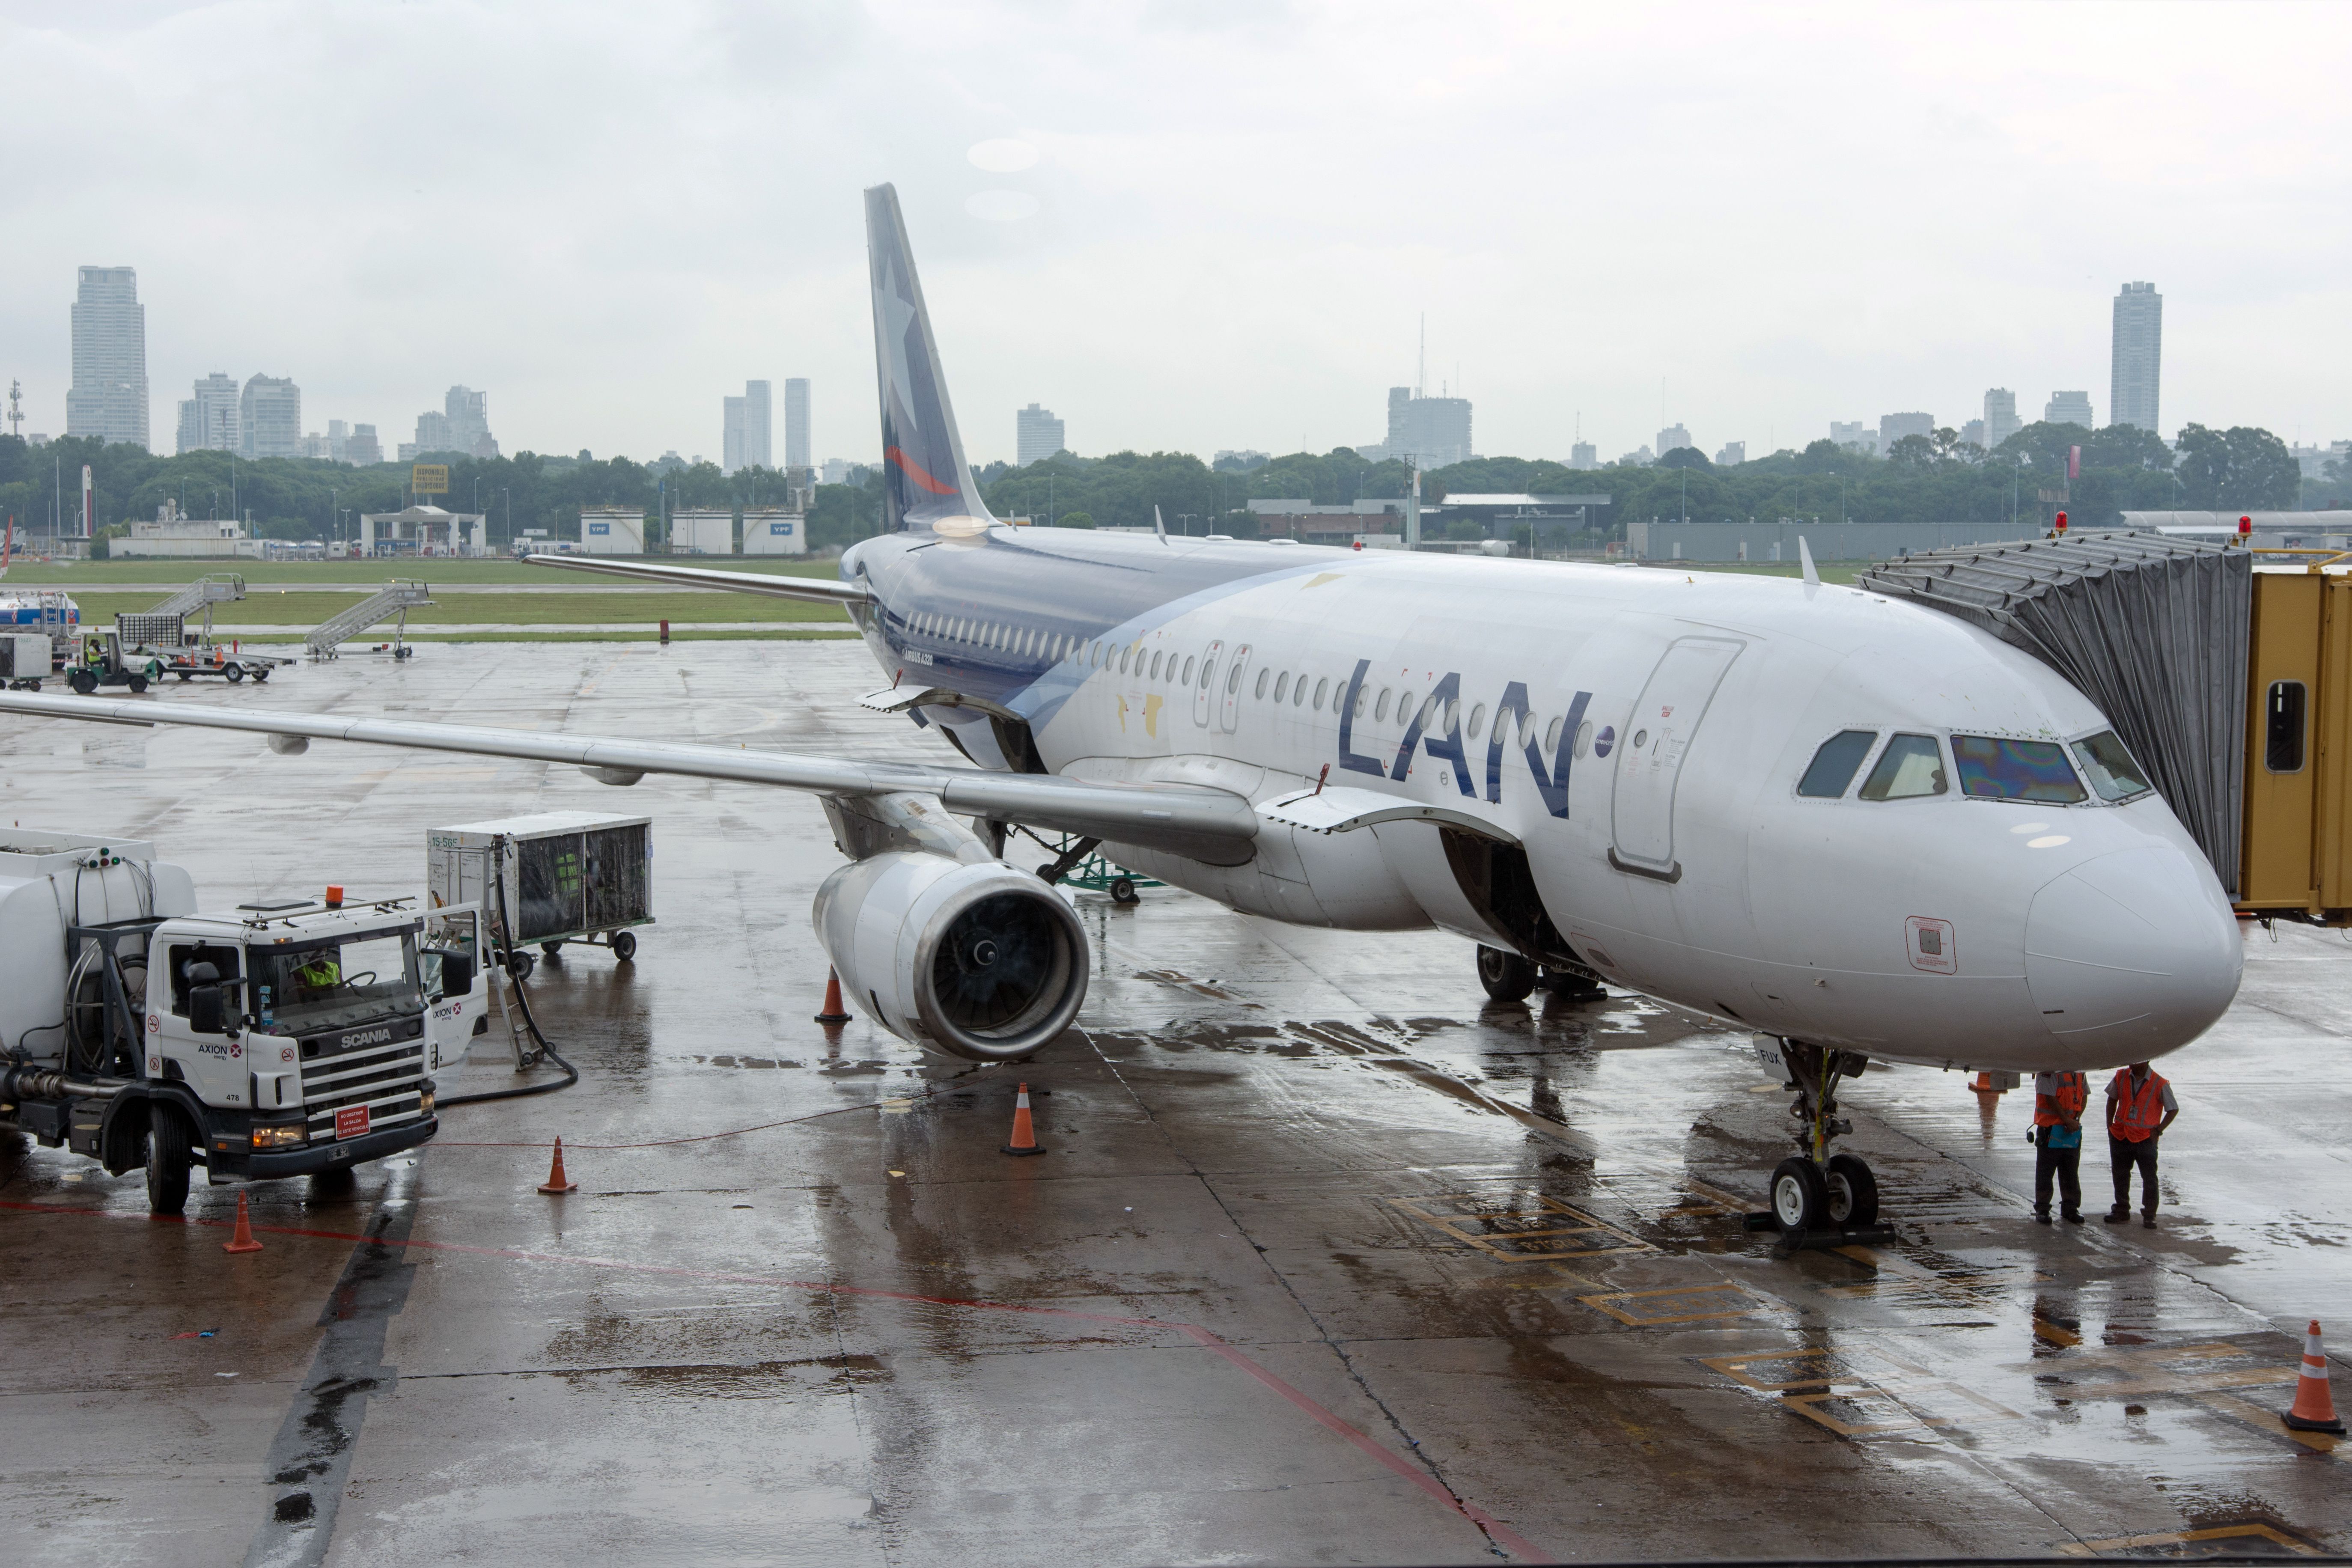 A LATAM aircraft on the airport apron.